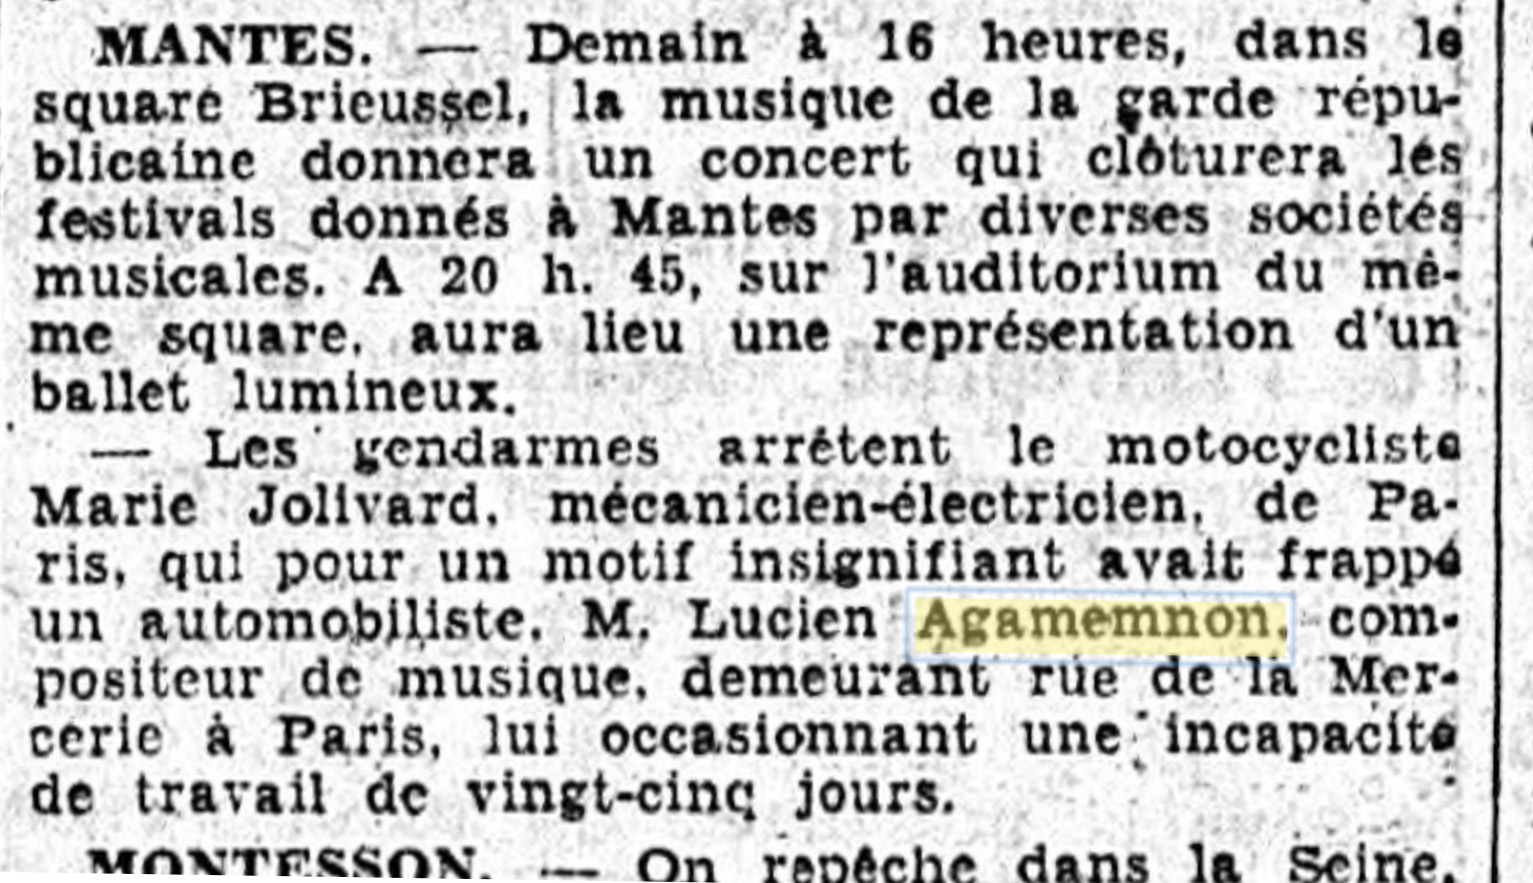 Lucien Agamemnon being victim of road rage (Le Matin, 18-09-1937).